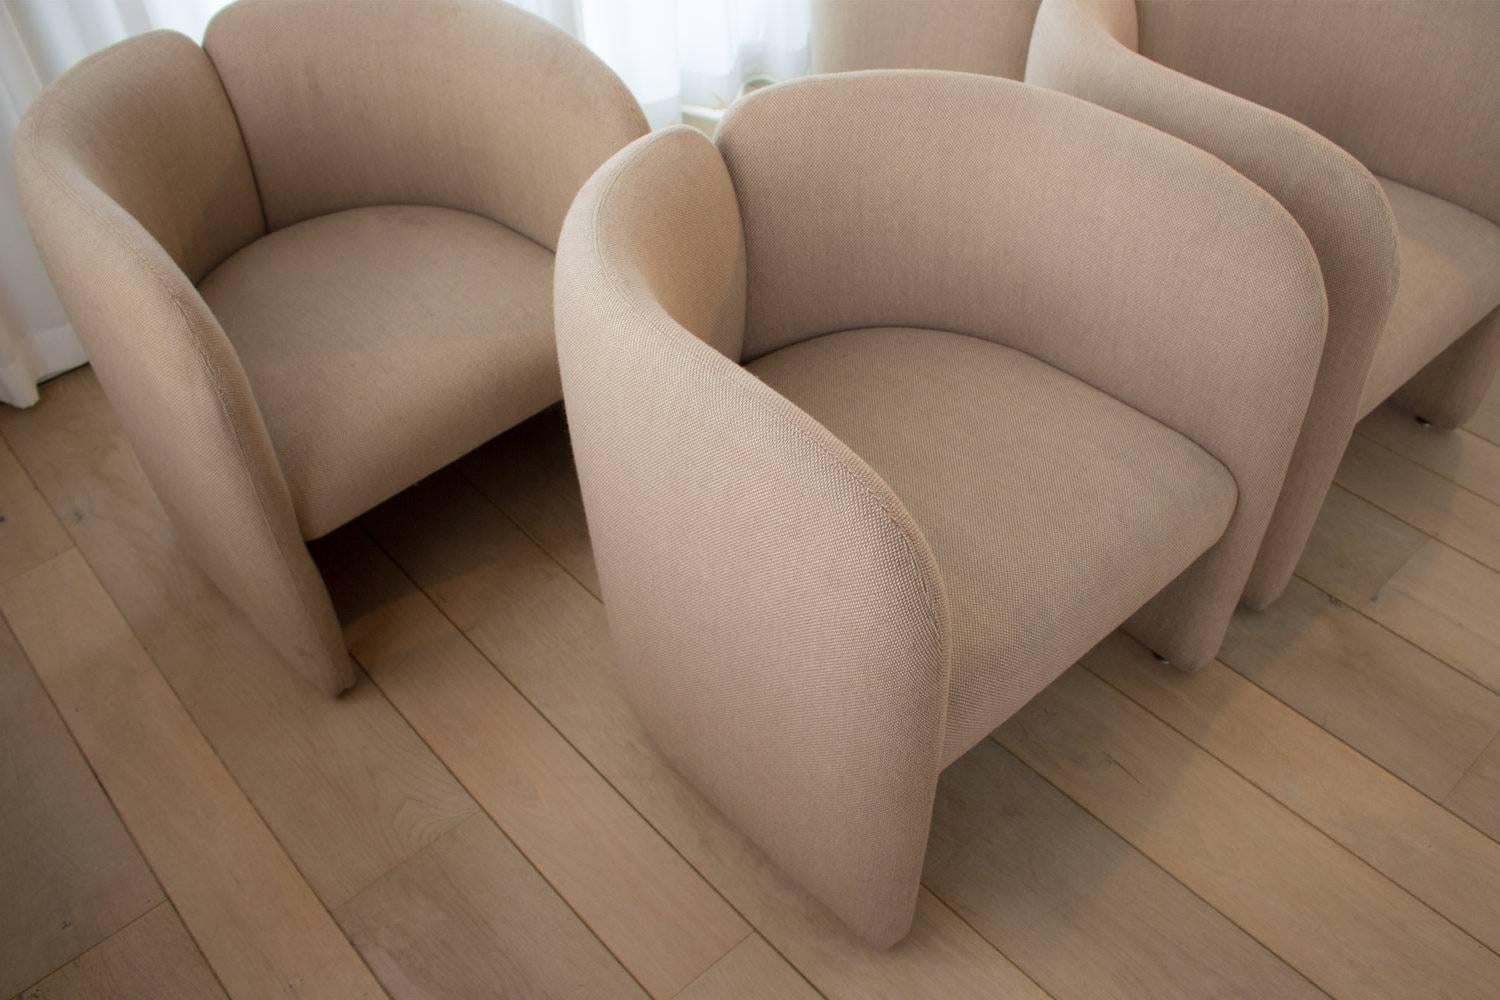 These beautiful champagne colored club chairs are a Bulo Belgium design from the 1980s. The chairs are upholstered in a soft and durable wool fabric.
The condition is impeccable, no stains or signs of wear. Imprinted by the designer underneath the